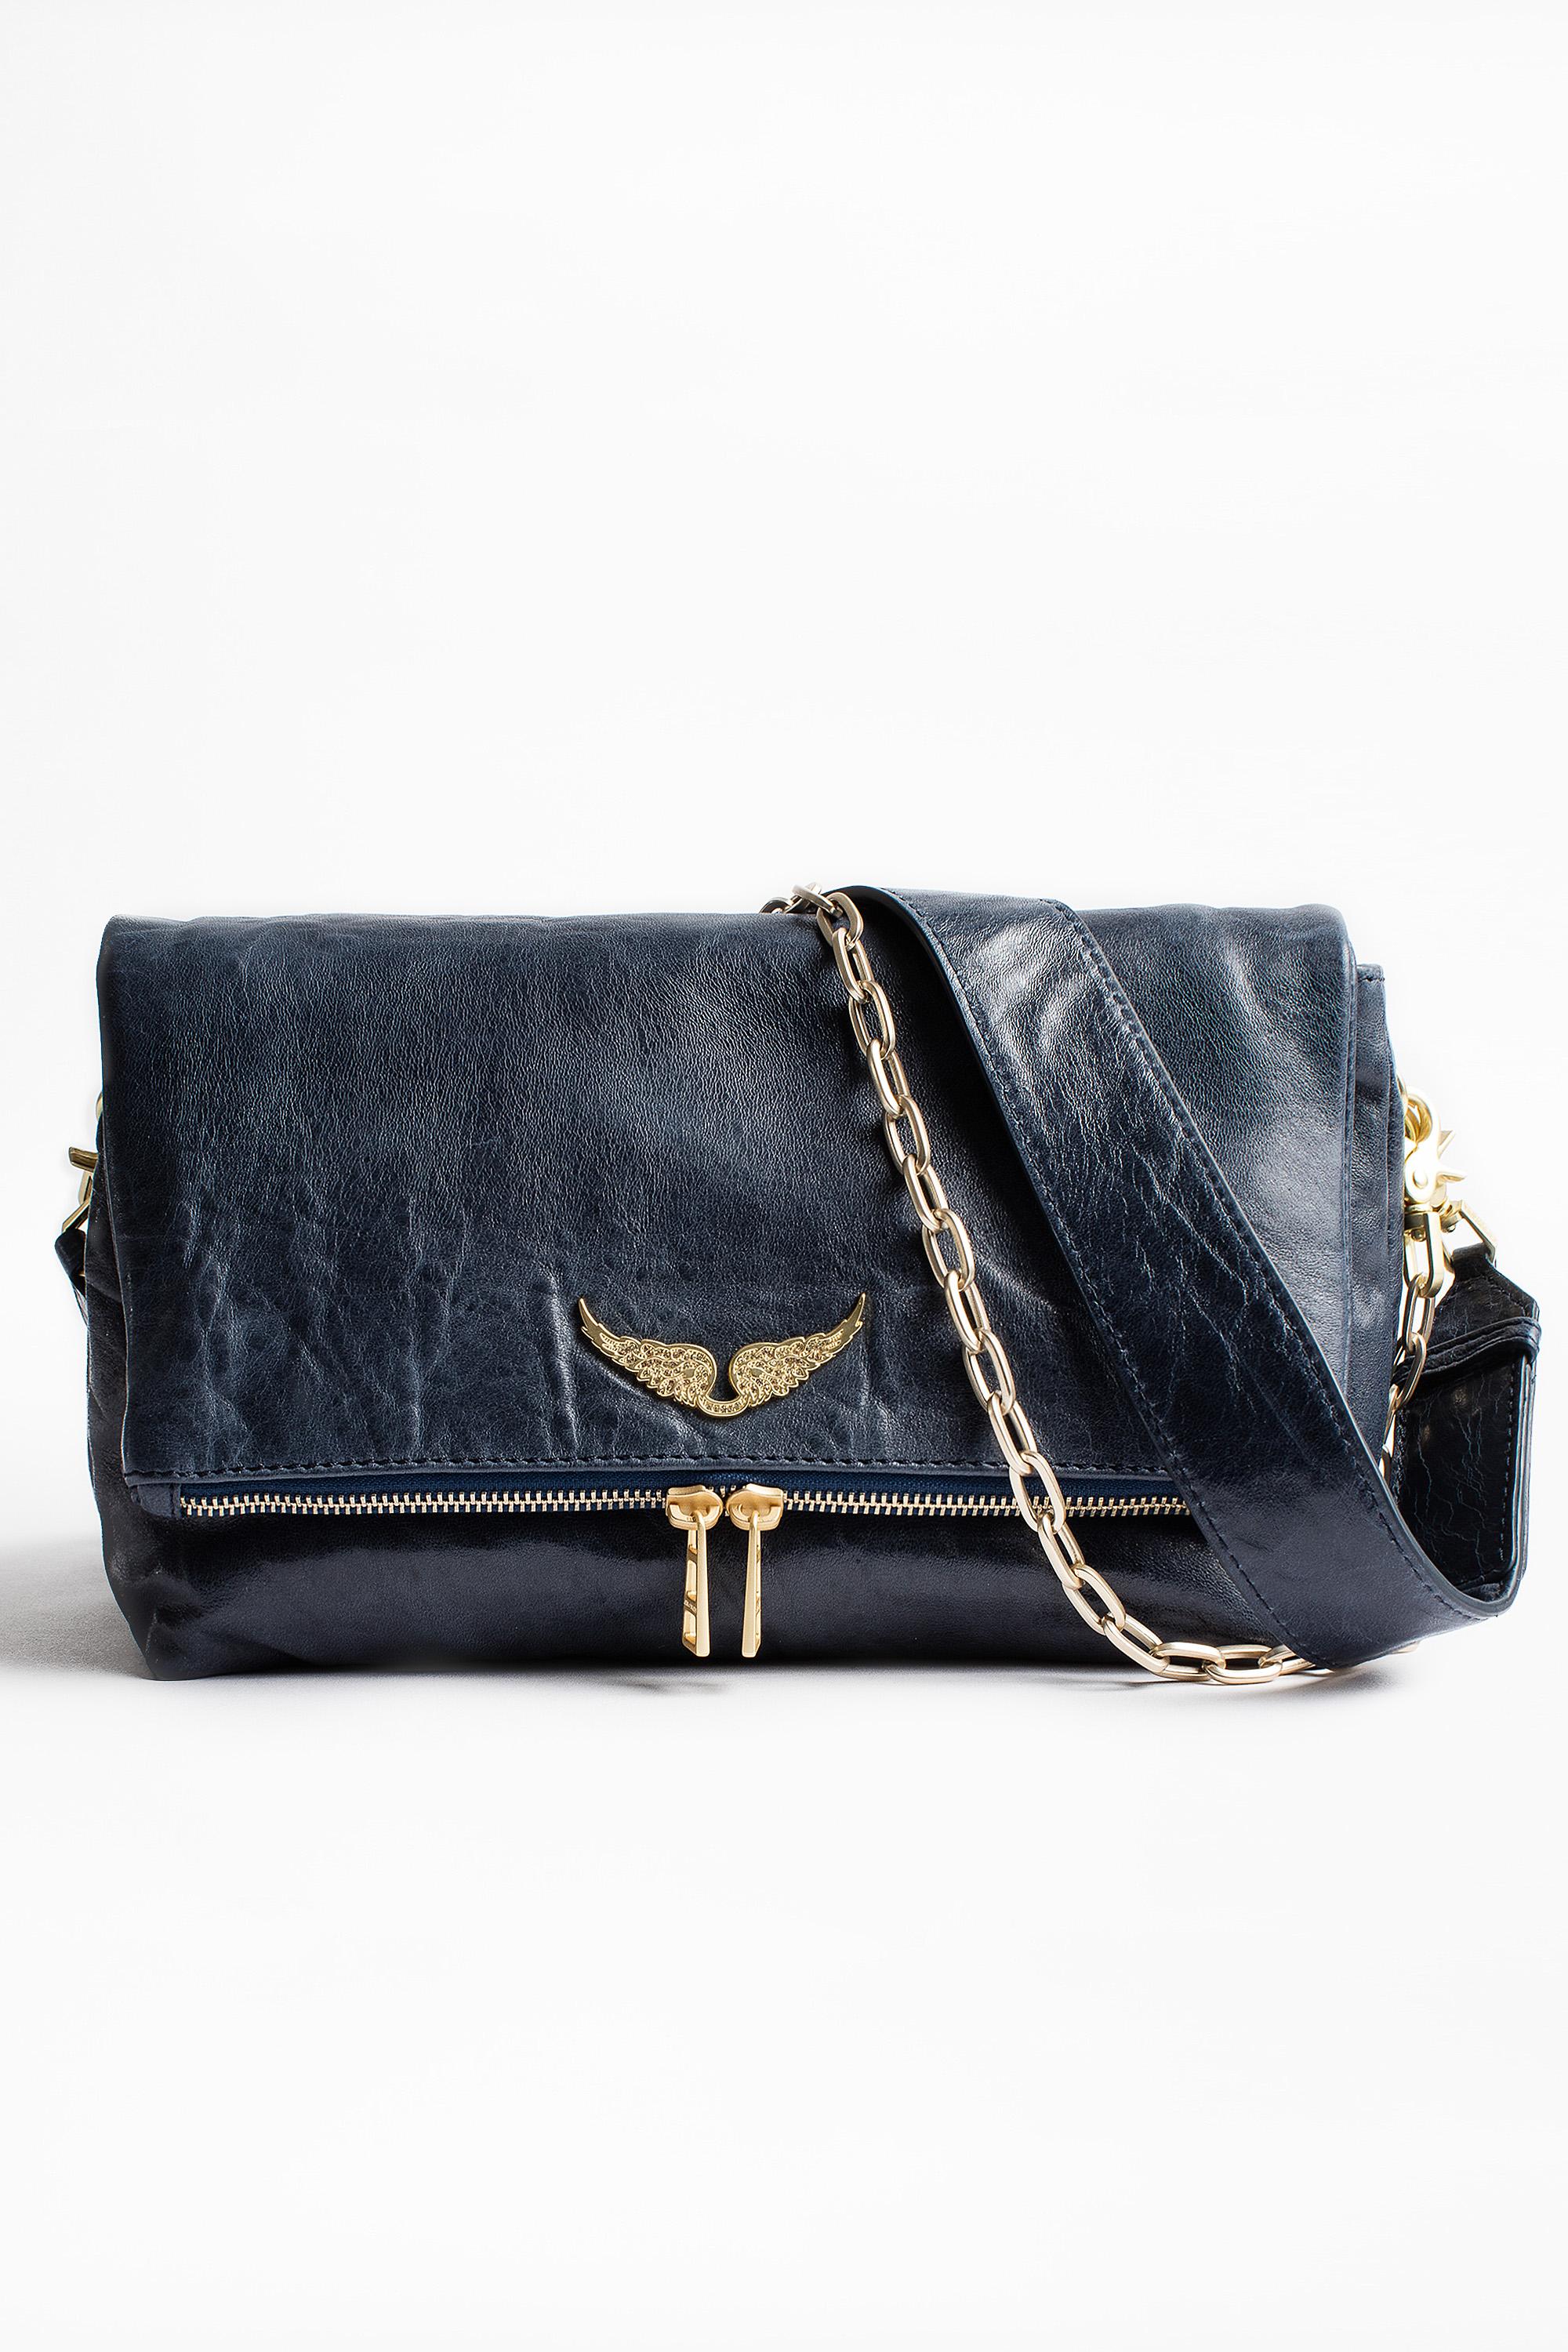 Zadig & Voltaire Leather Rocky Crush Bag in Navy (Blue) - Lyst